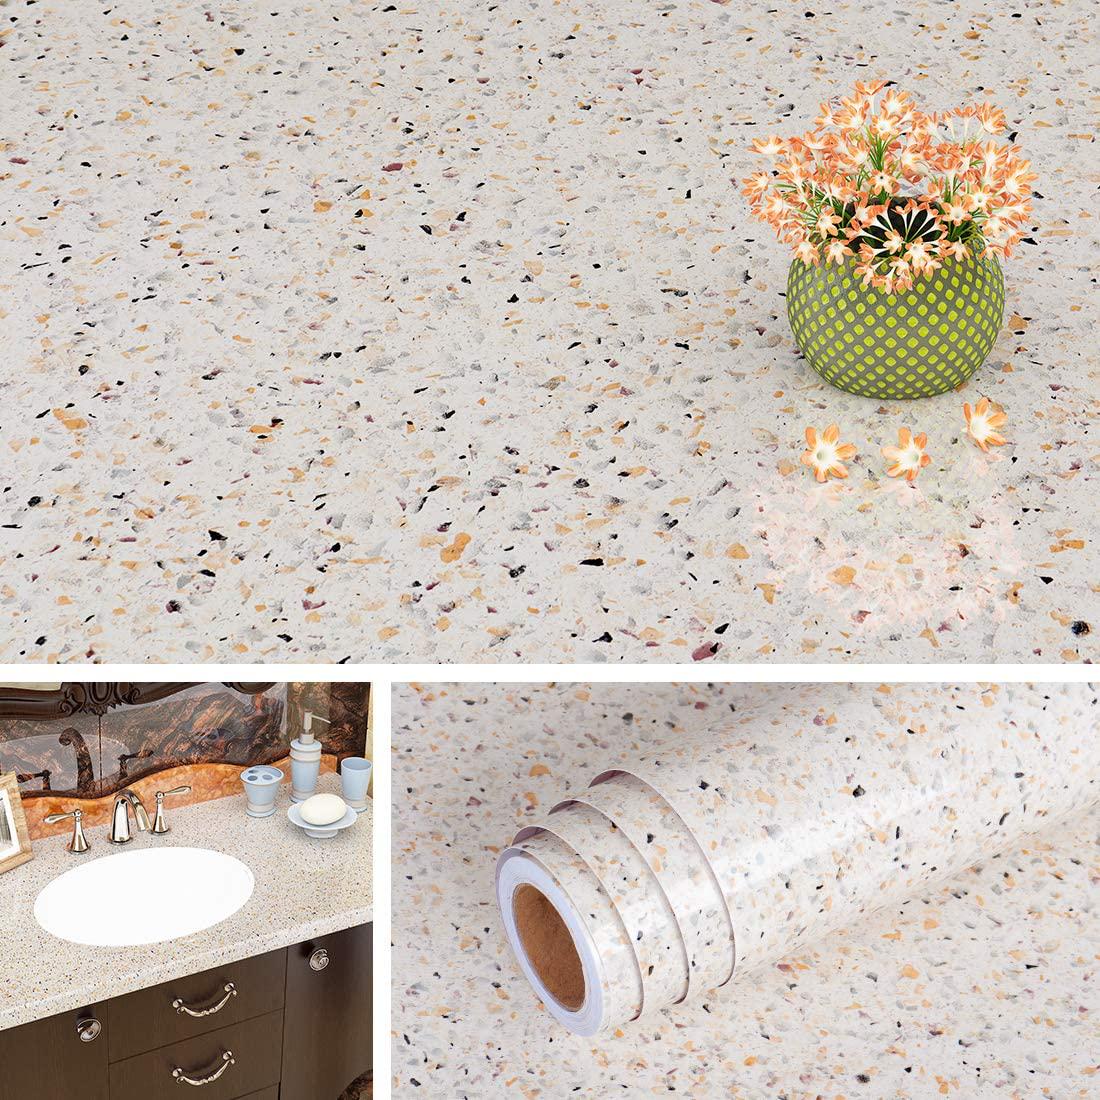 Livelynine, Livelynine 15.8 x 394 Inch Contact Paper Granite Countertop Adhesive Wallpaper Peel and Stick Vinyl Countertop Covering Paper for Bathroom Kitchen Counter Top Waterproof Faux Granite Stickers